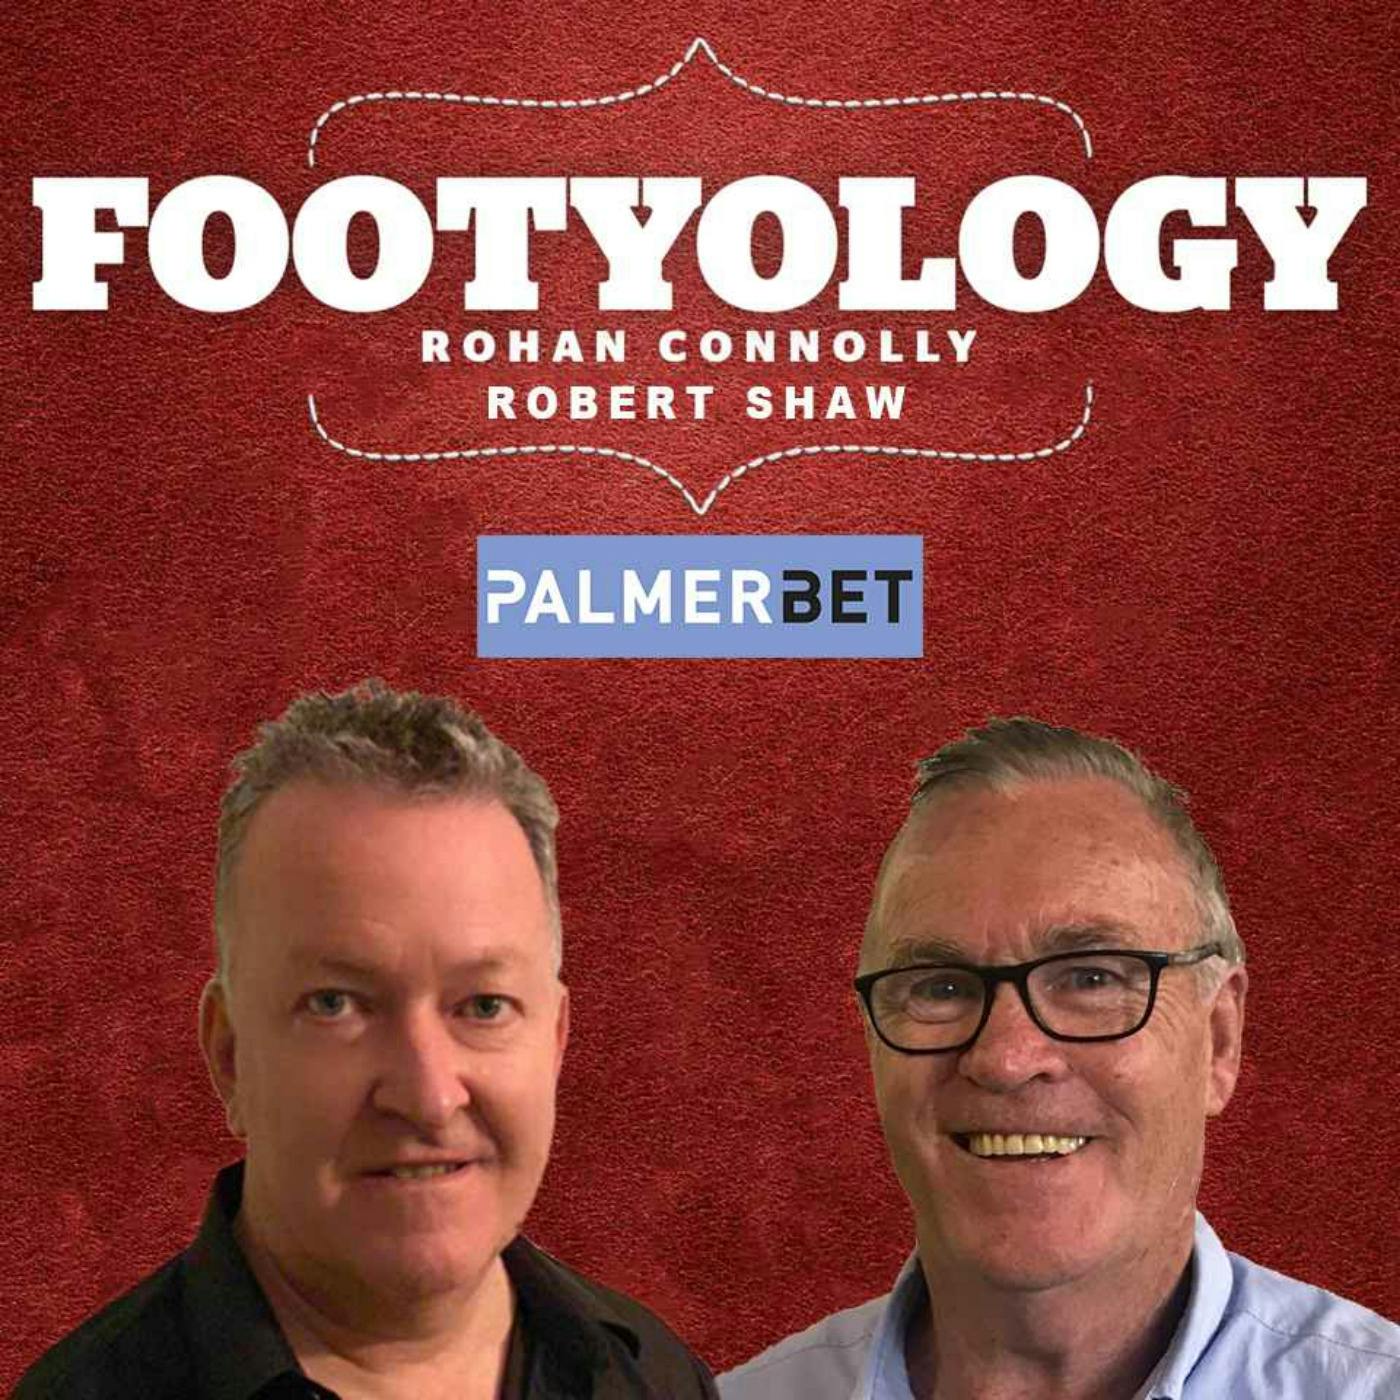 Footyology Podcast - May 1st 2022